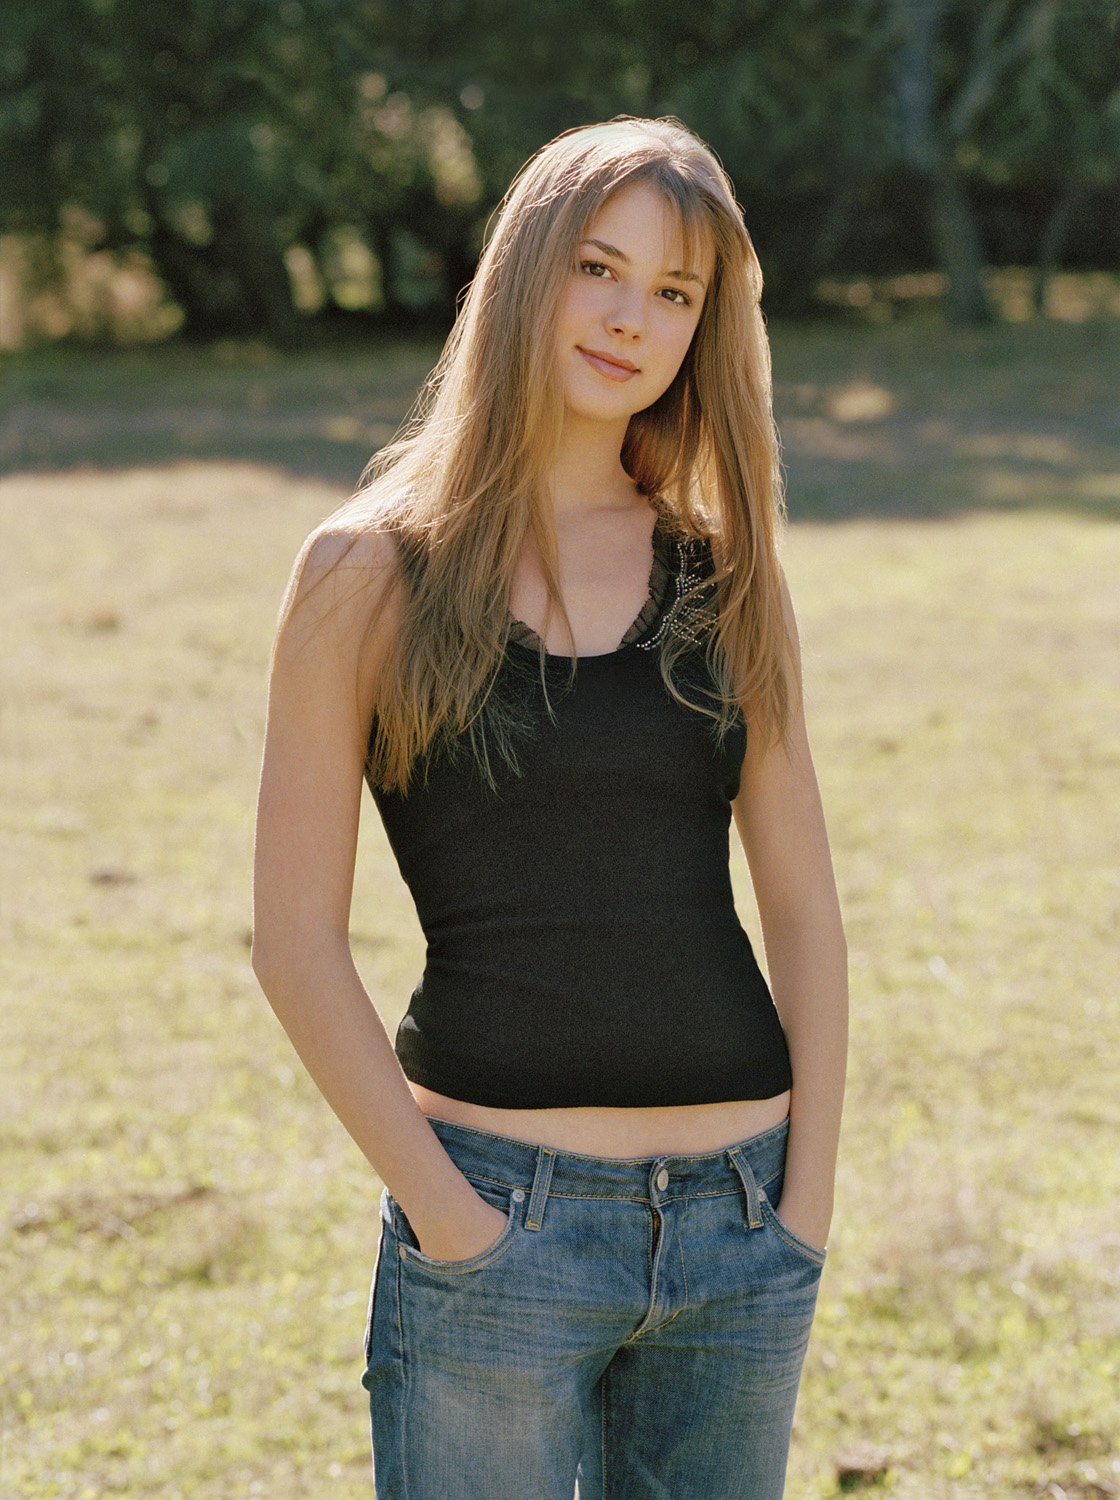 People 1120x1500 Emily Vancamp women actress jeans long hair hands in pockets grass Canadian